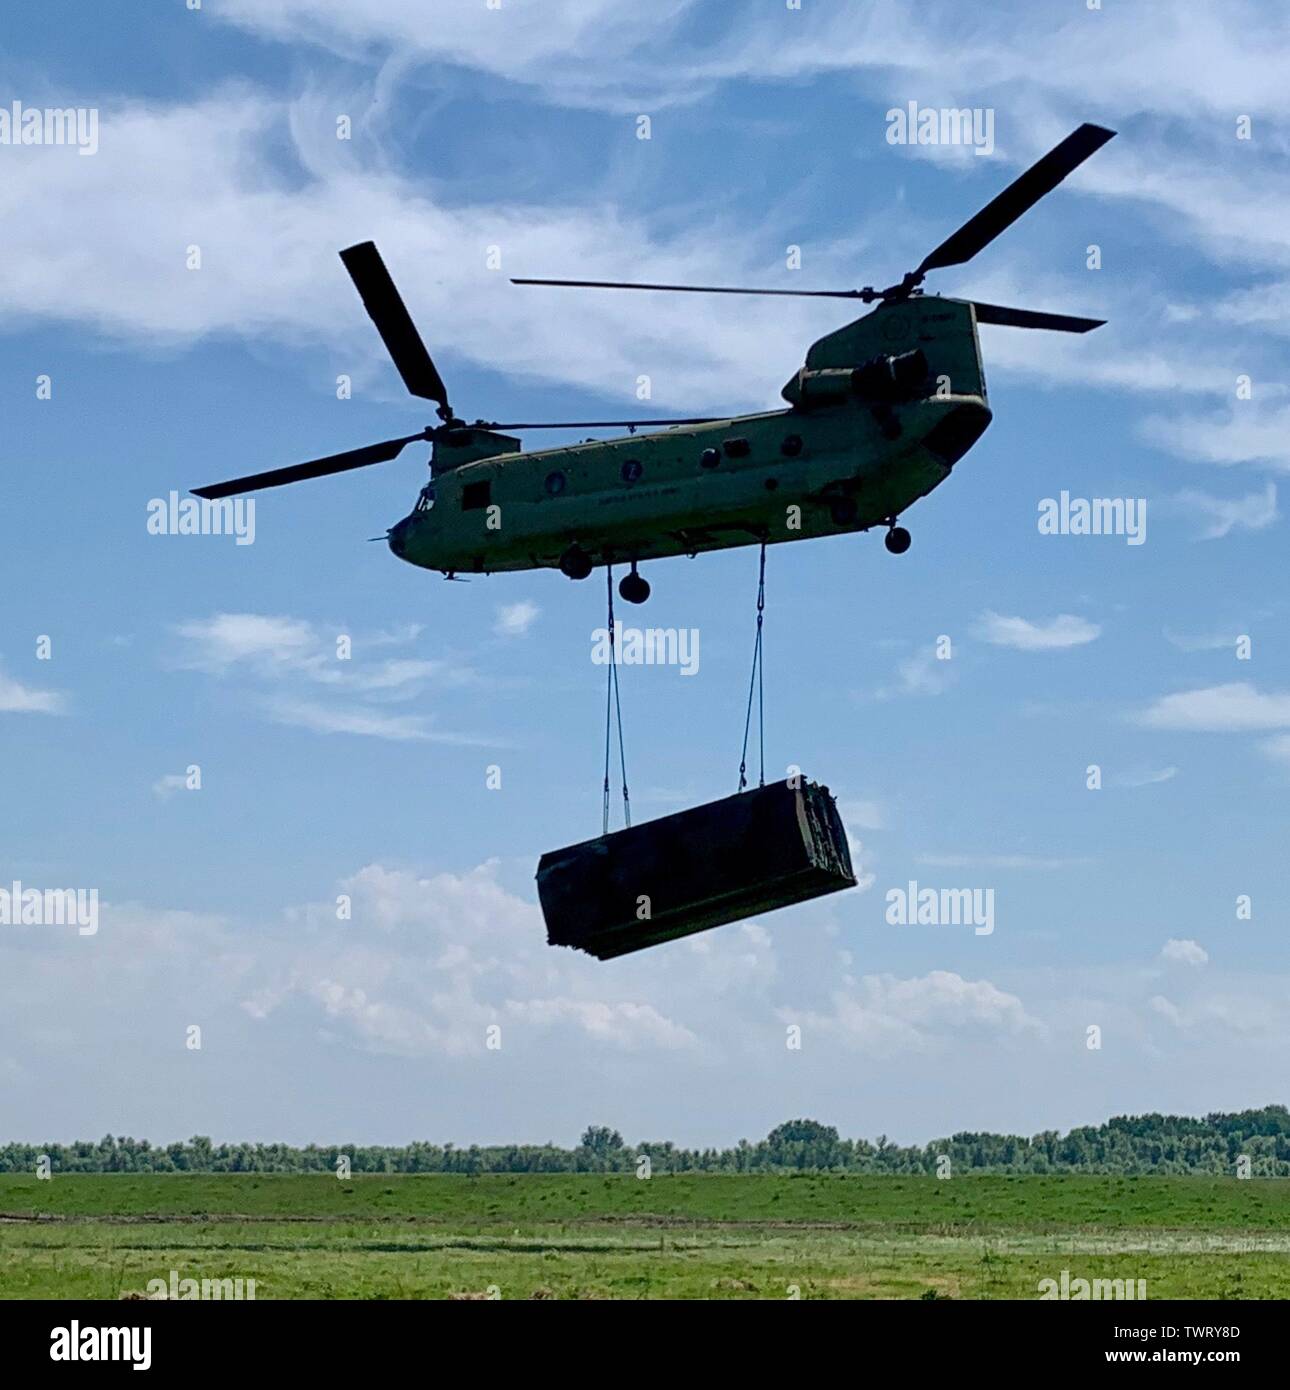 A U.S. Army CH-47 Chinook from the 12th Combat Aviation Brigade is en route to deliver raft section to engineers waiting on the Danube River in Bordusani, Romania June 20, 2019 during Saber Guardian 19. Saber Guardian 19 is an exercise co-led by the Romanian Joint Force Command and U.S. Army Europe, taking place from June 3 - 24 at various locations in Bulgaria, Hungary and Romania. Saber Guardian 19 is designed to improve the integration of multinational combat forces. (U.S. Army photo by Cpt. Erica Mitchell) Stock Photo